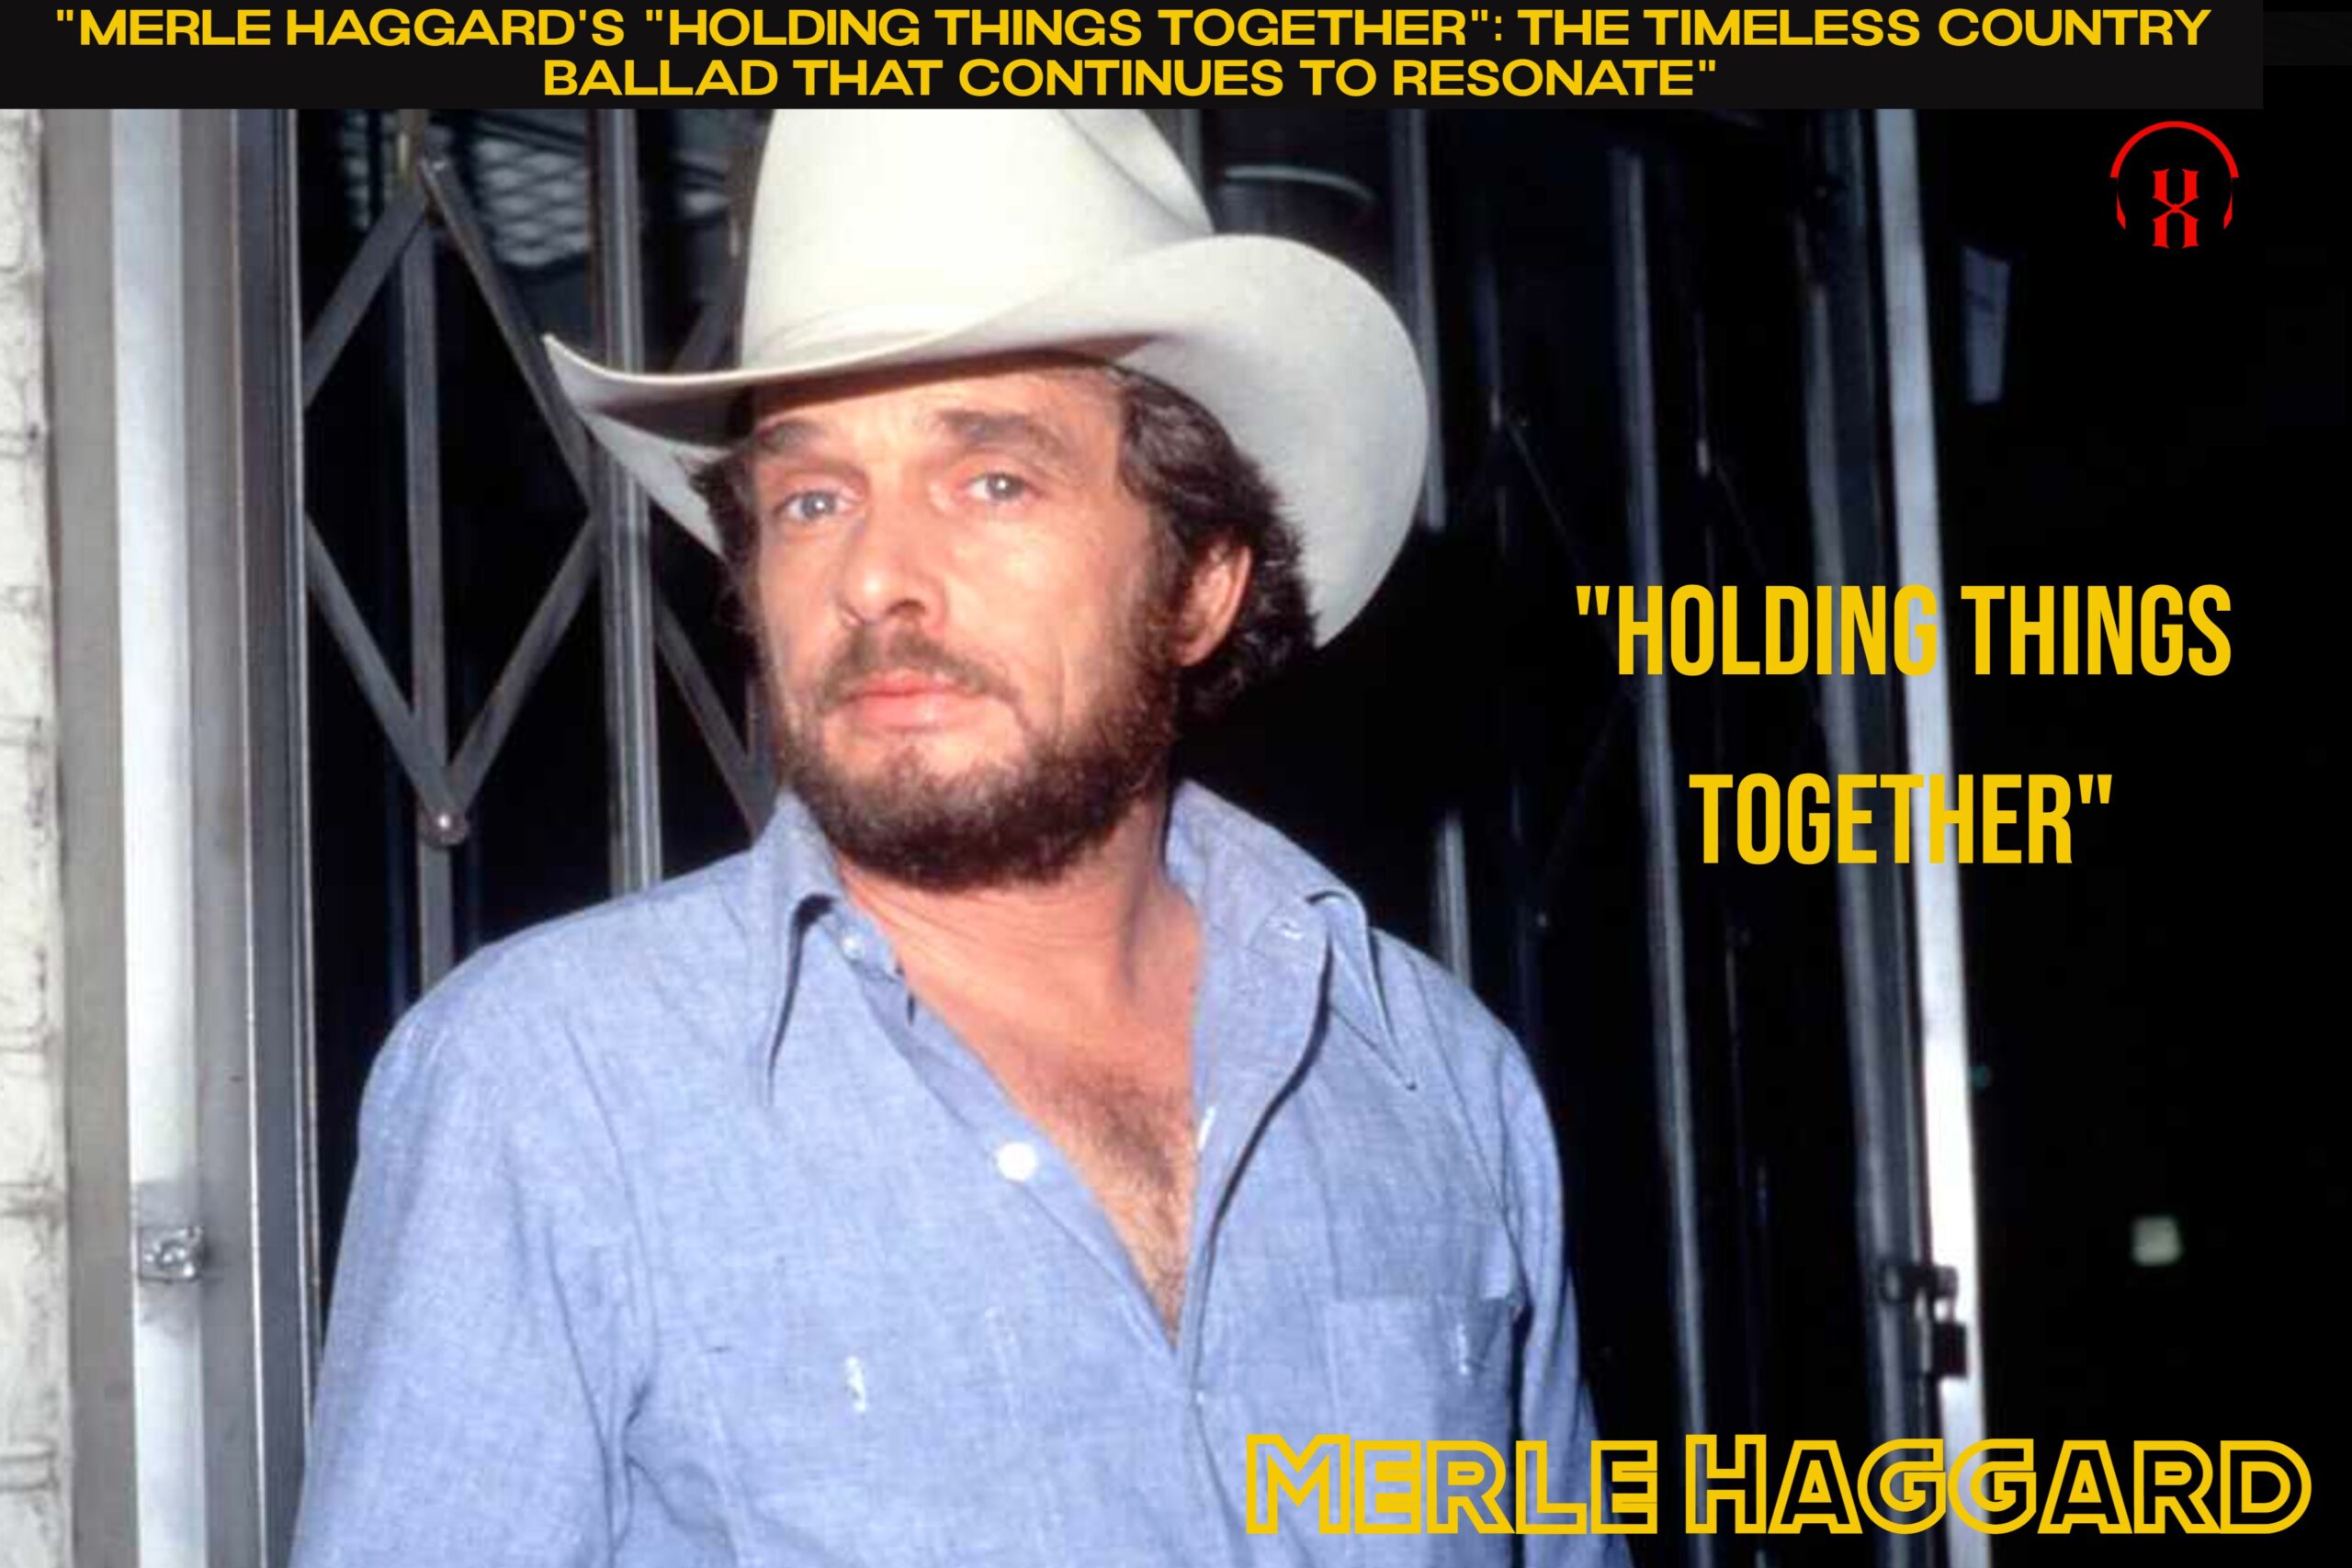 "Merle Haggard's "Holding Things Together": The Timeless Country Ballad That Continues to Resonate"